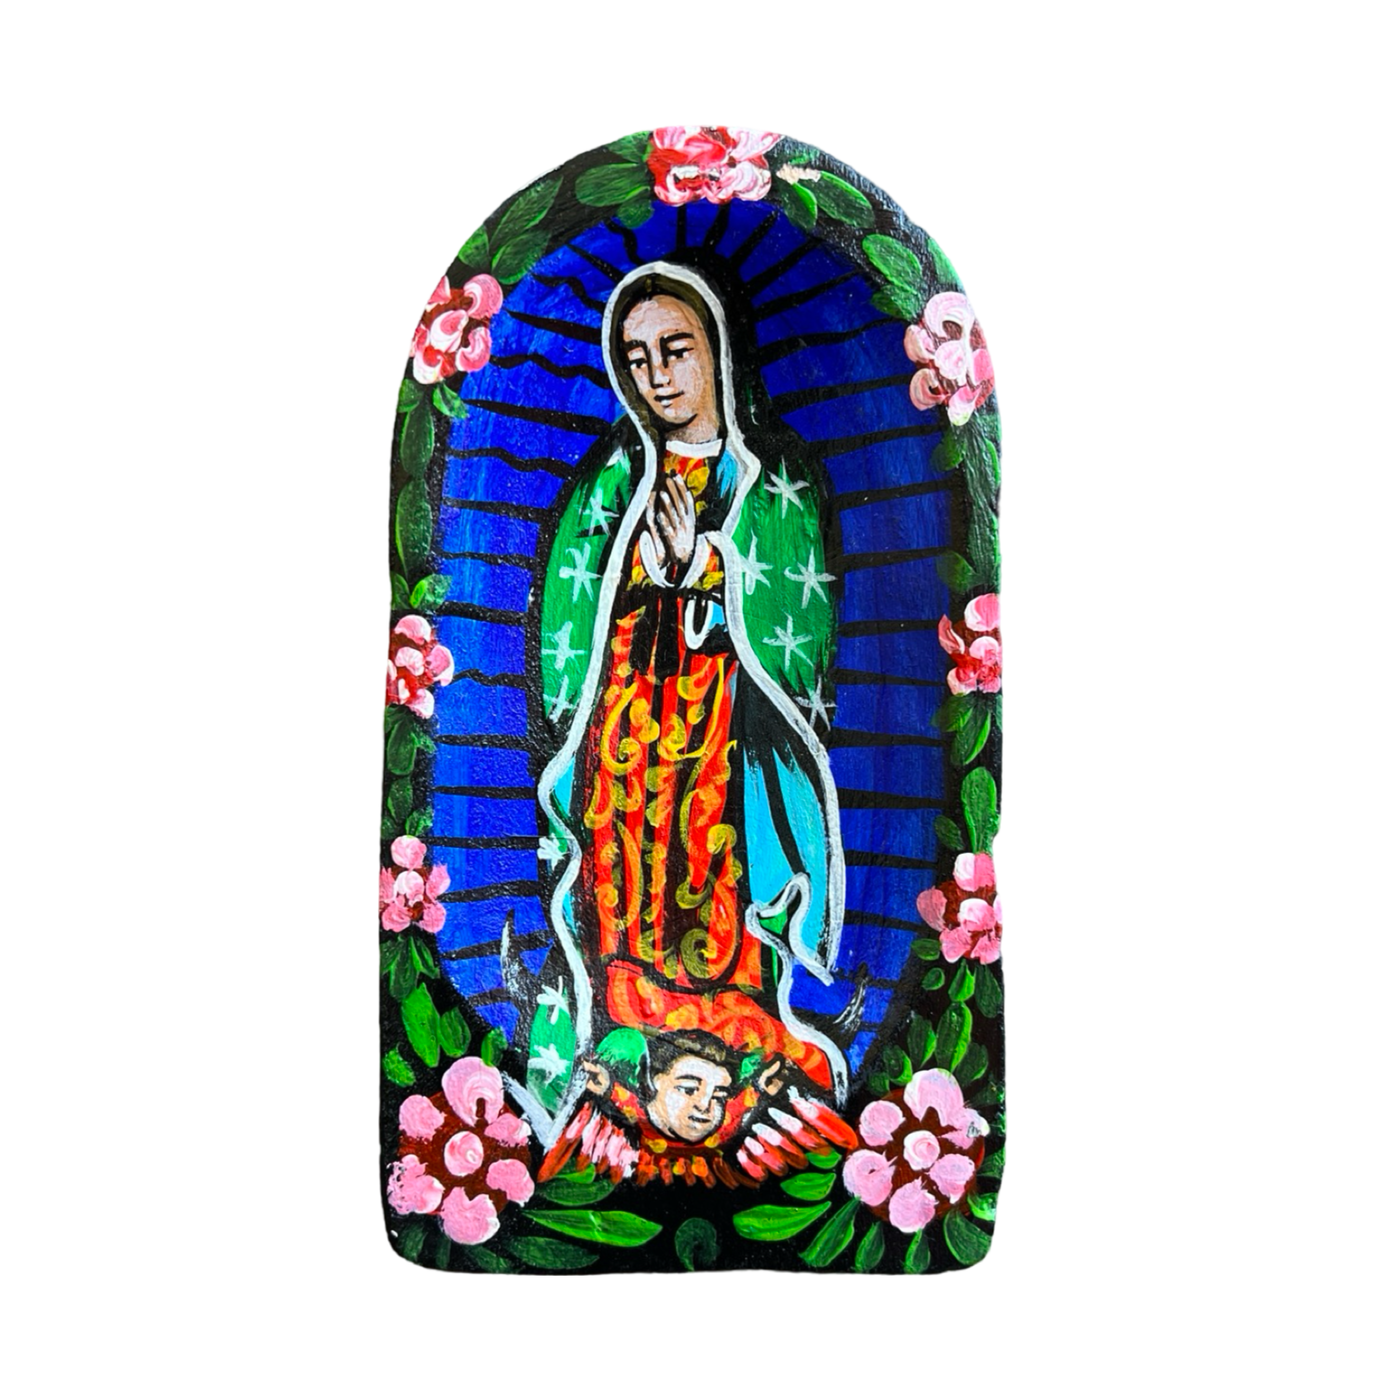 a wooden batea handpainted with an image of the VIrgin Mary